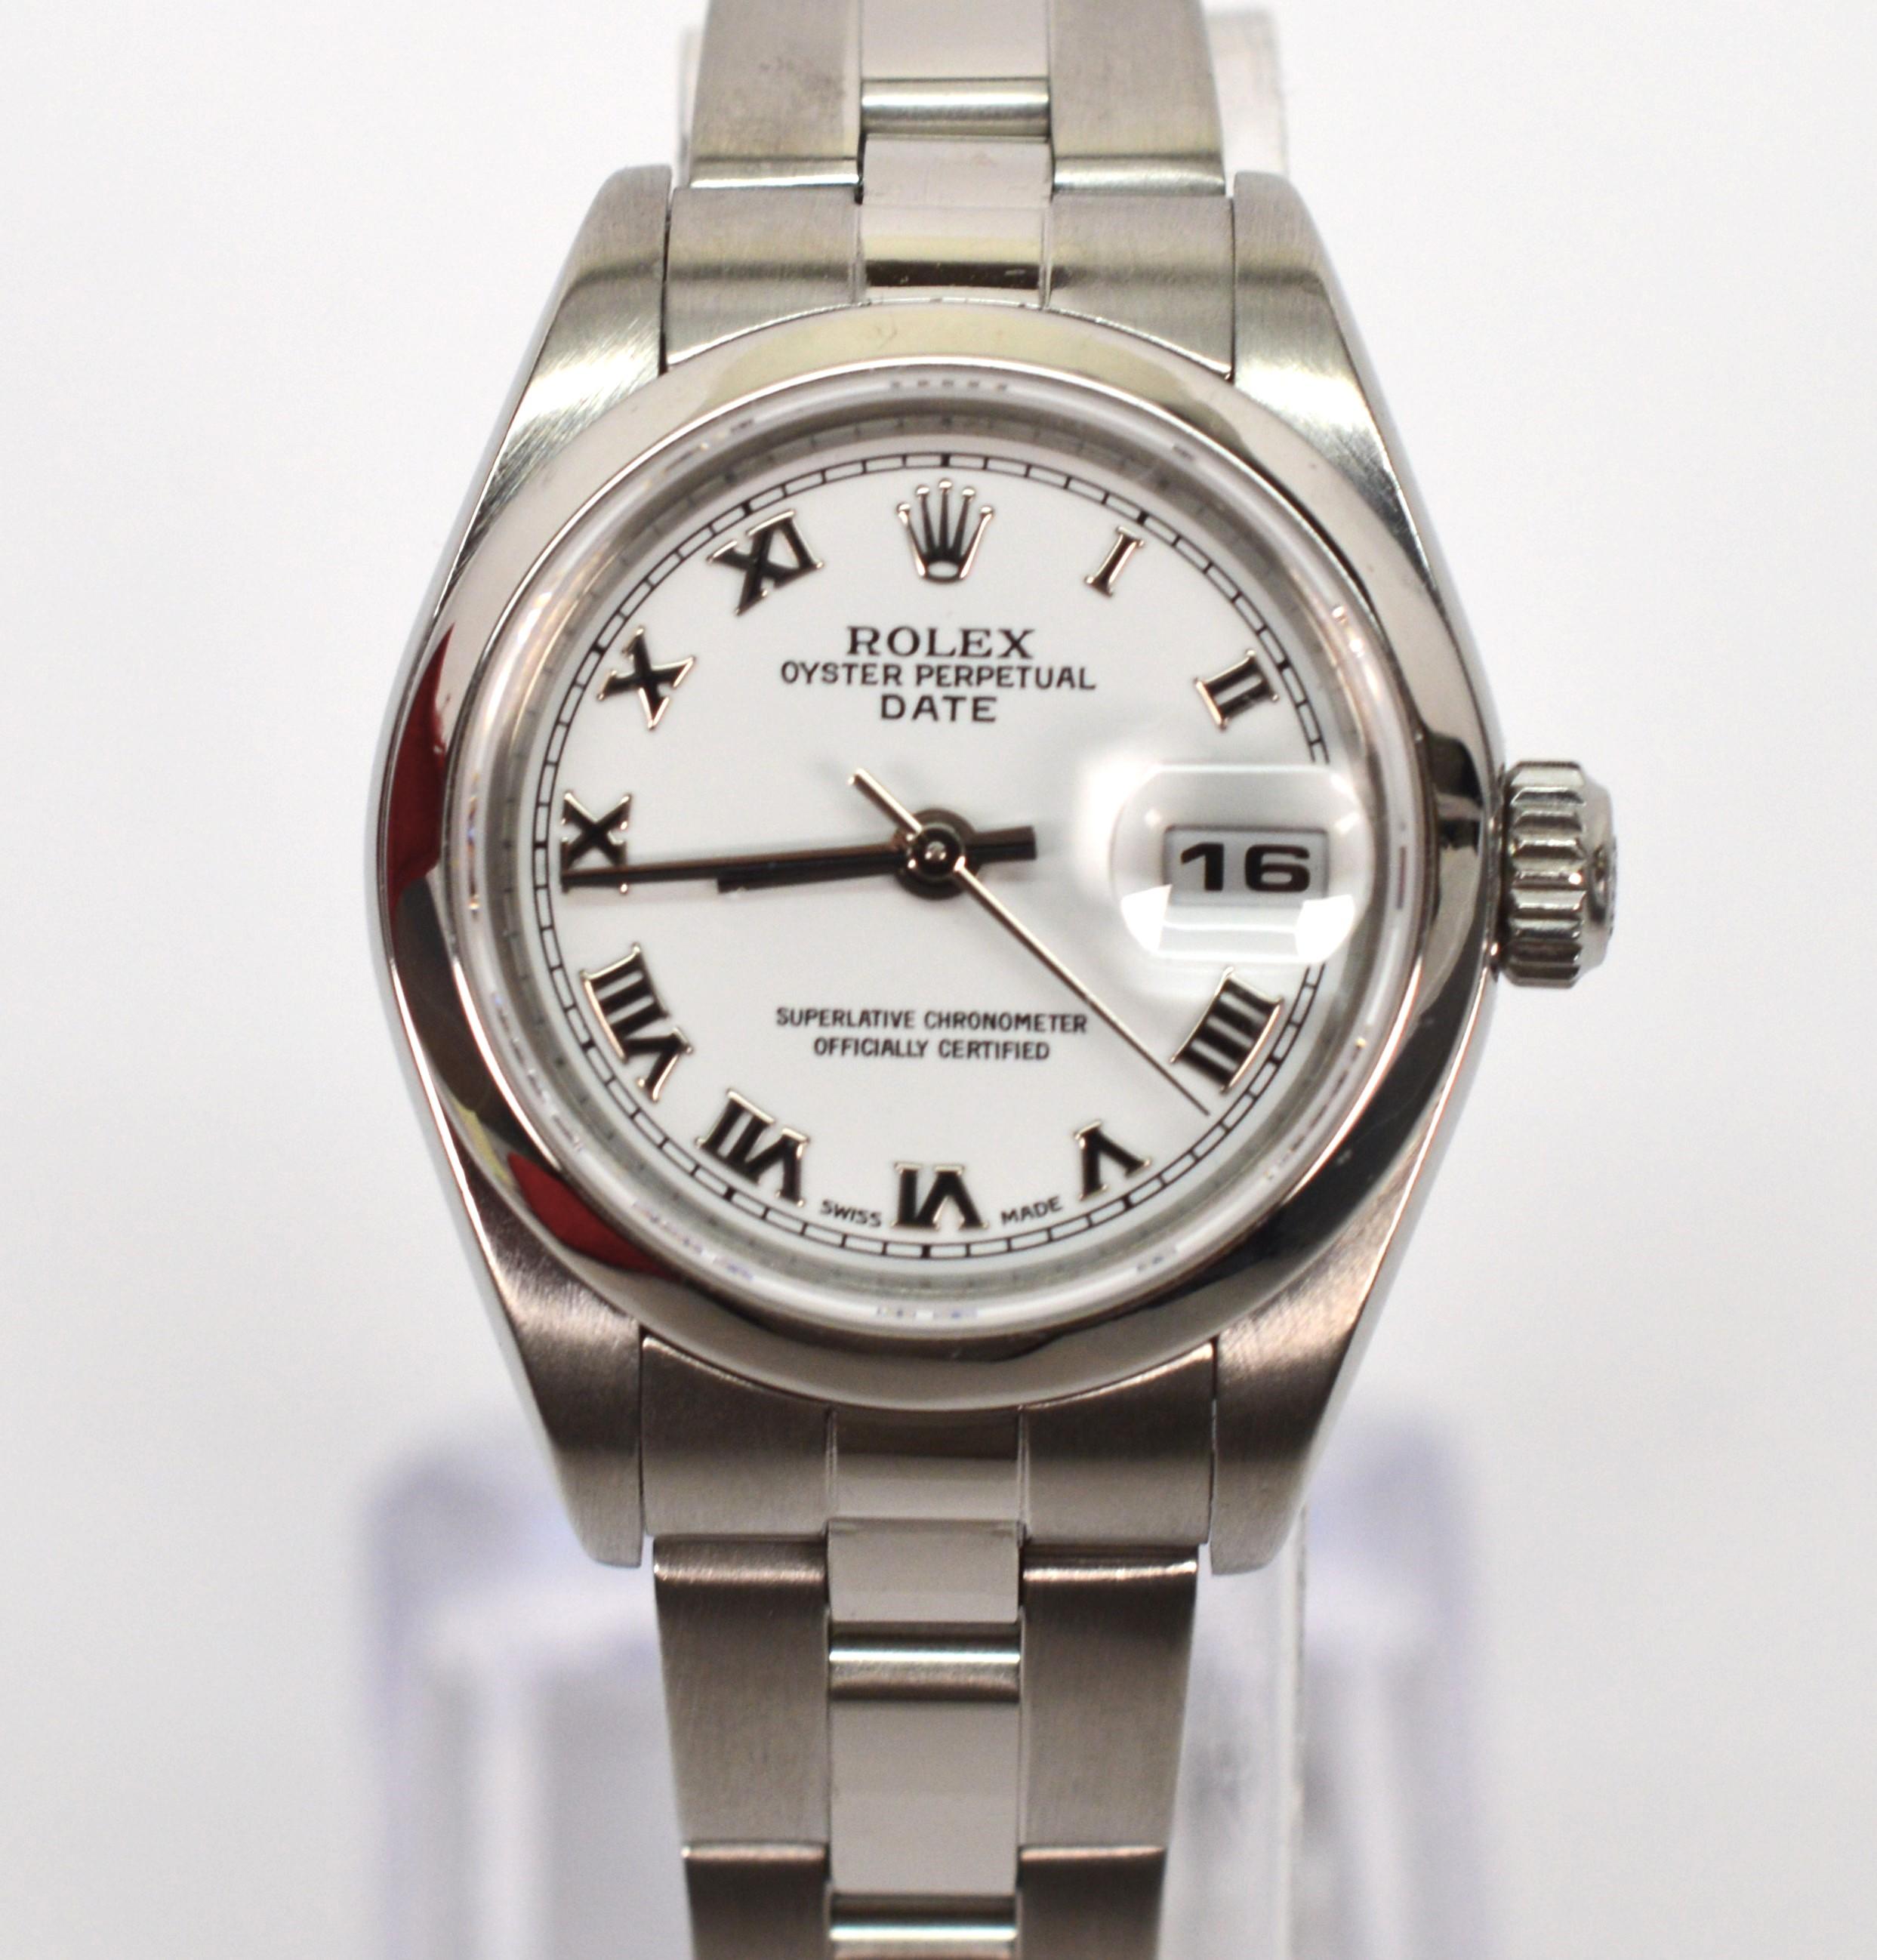 Rolex Oyster Perpetual Date 79160 Stainless Steel Women's Wrist Watch In Excellent Condition For Sale In Mount Kisco, NY